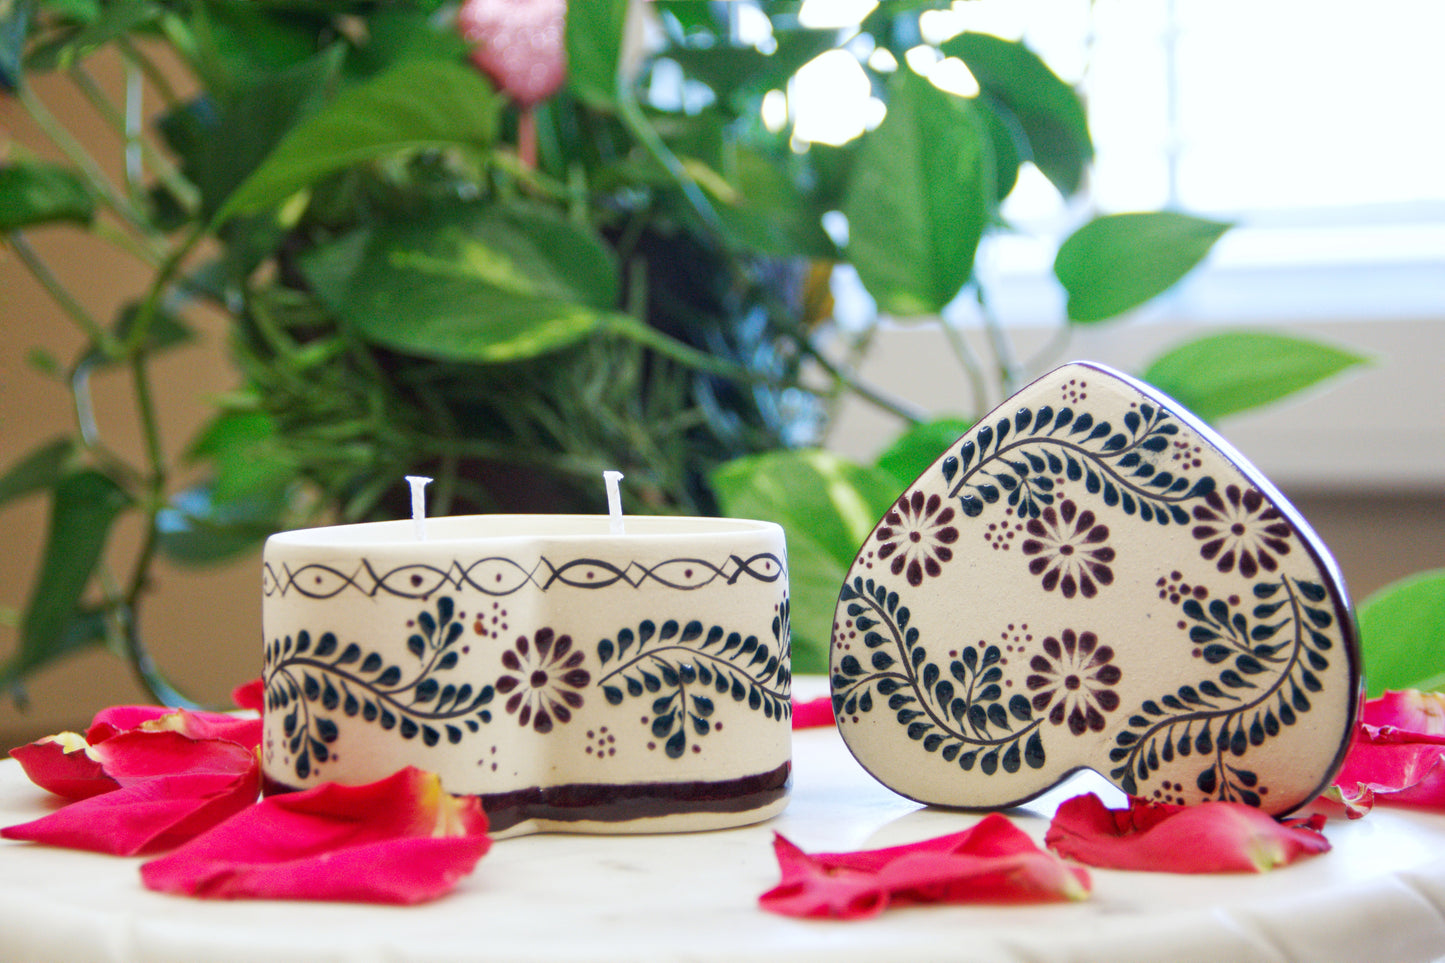 Artisanal candle in a beautiful heart shaped talavera. Handmade brown floral design with a lid on the side. Handcrafted by Artisan in Mexico City. 100% All Natural Soy Candle. Reuse the talavera as home decor or storage.